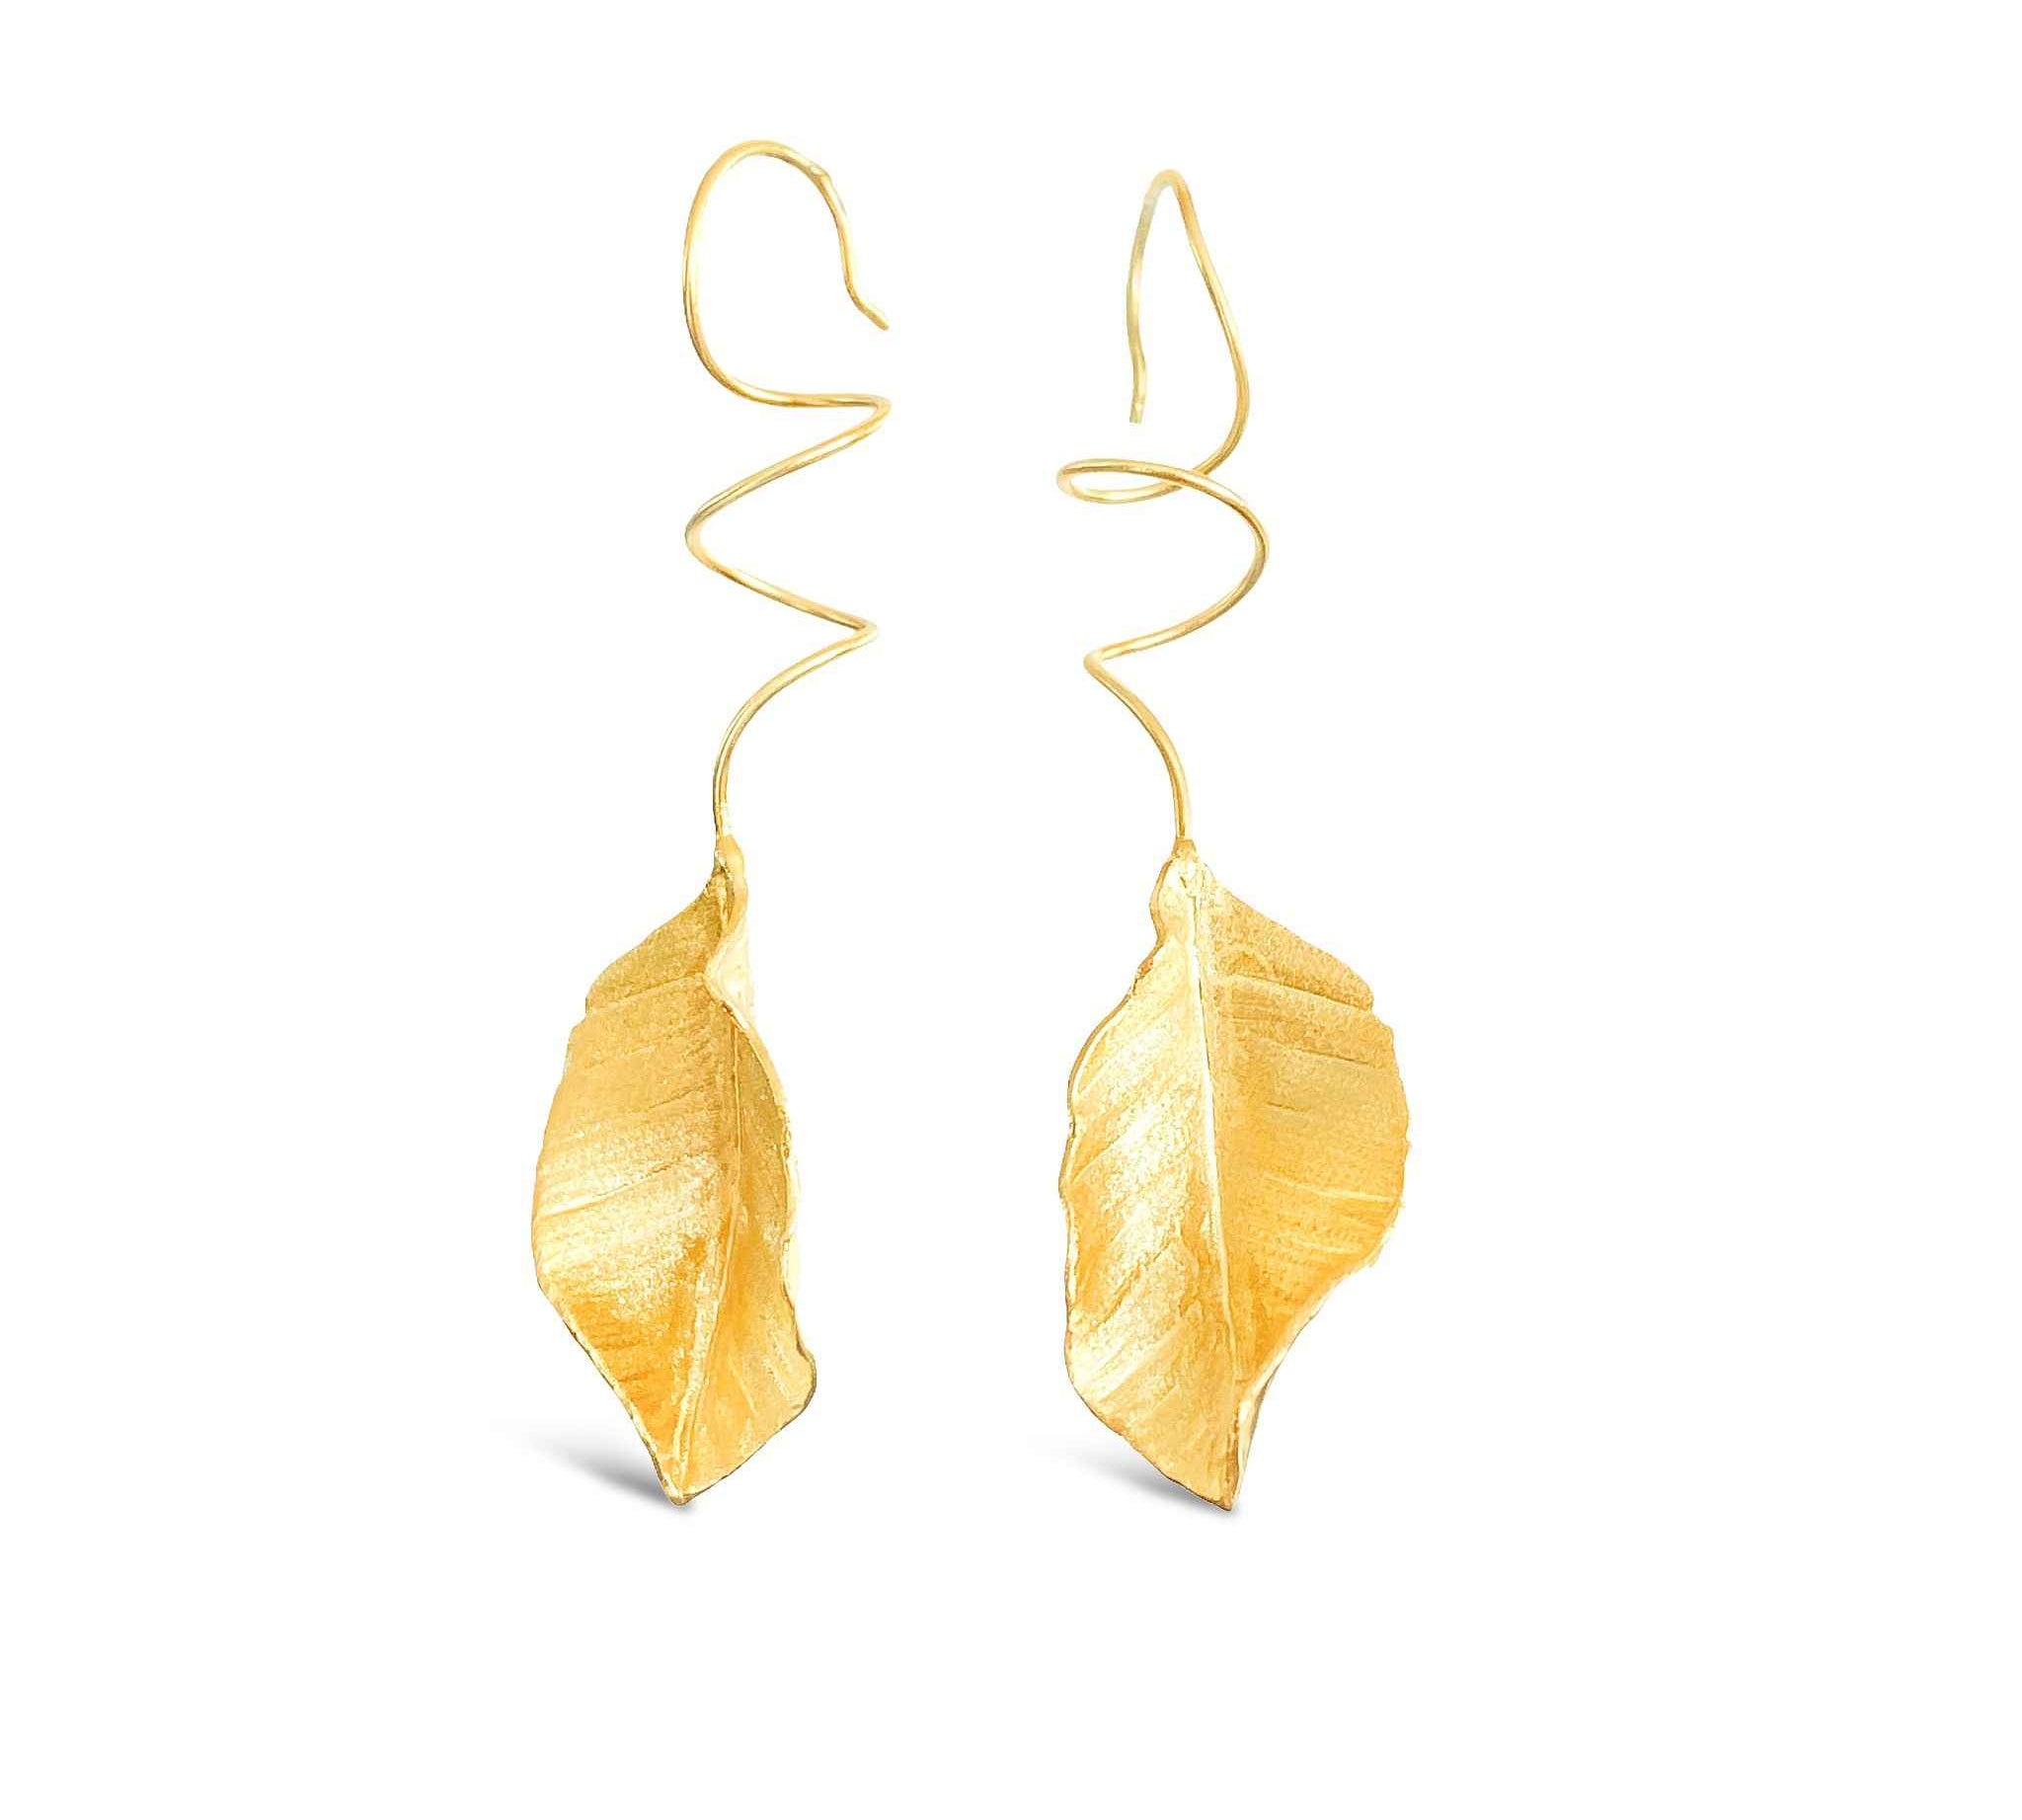 Elegant sterling silver leaf drop earrings by Alessandra James, handcrafted with attention to detail.